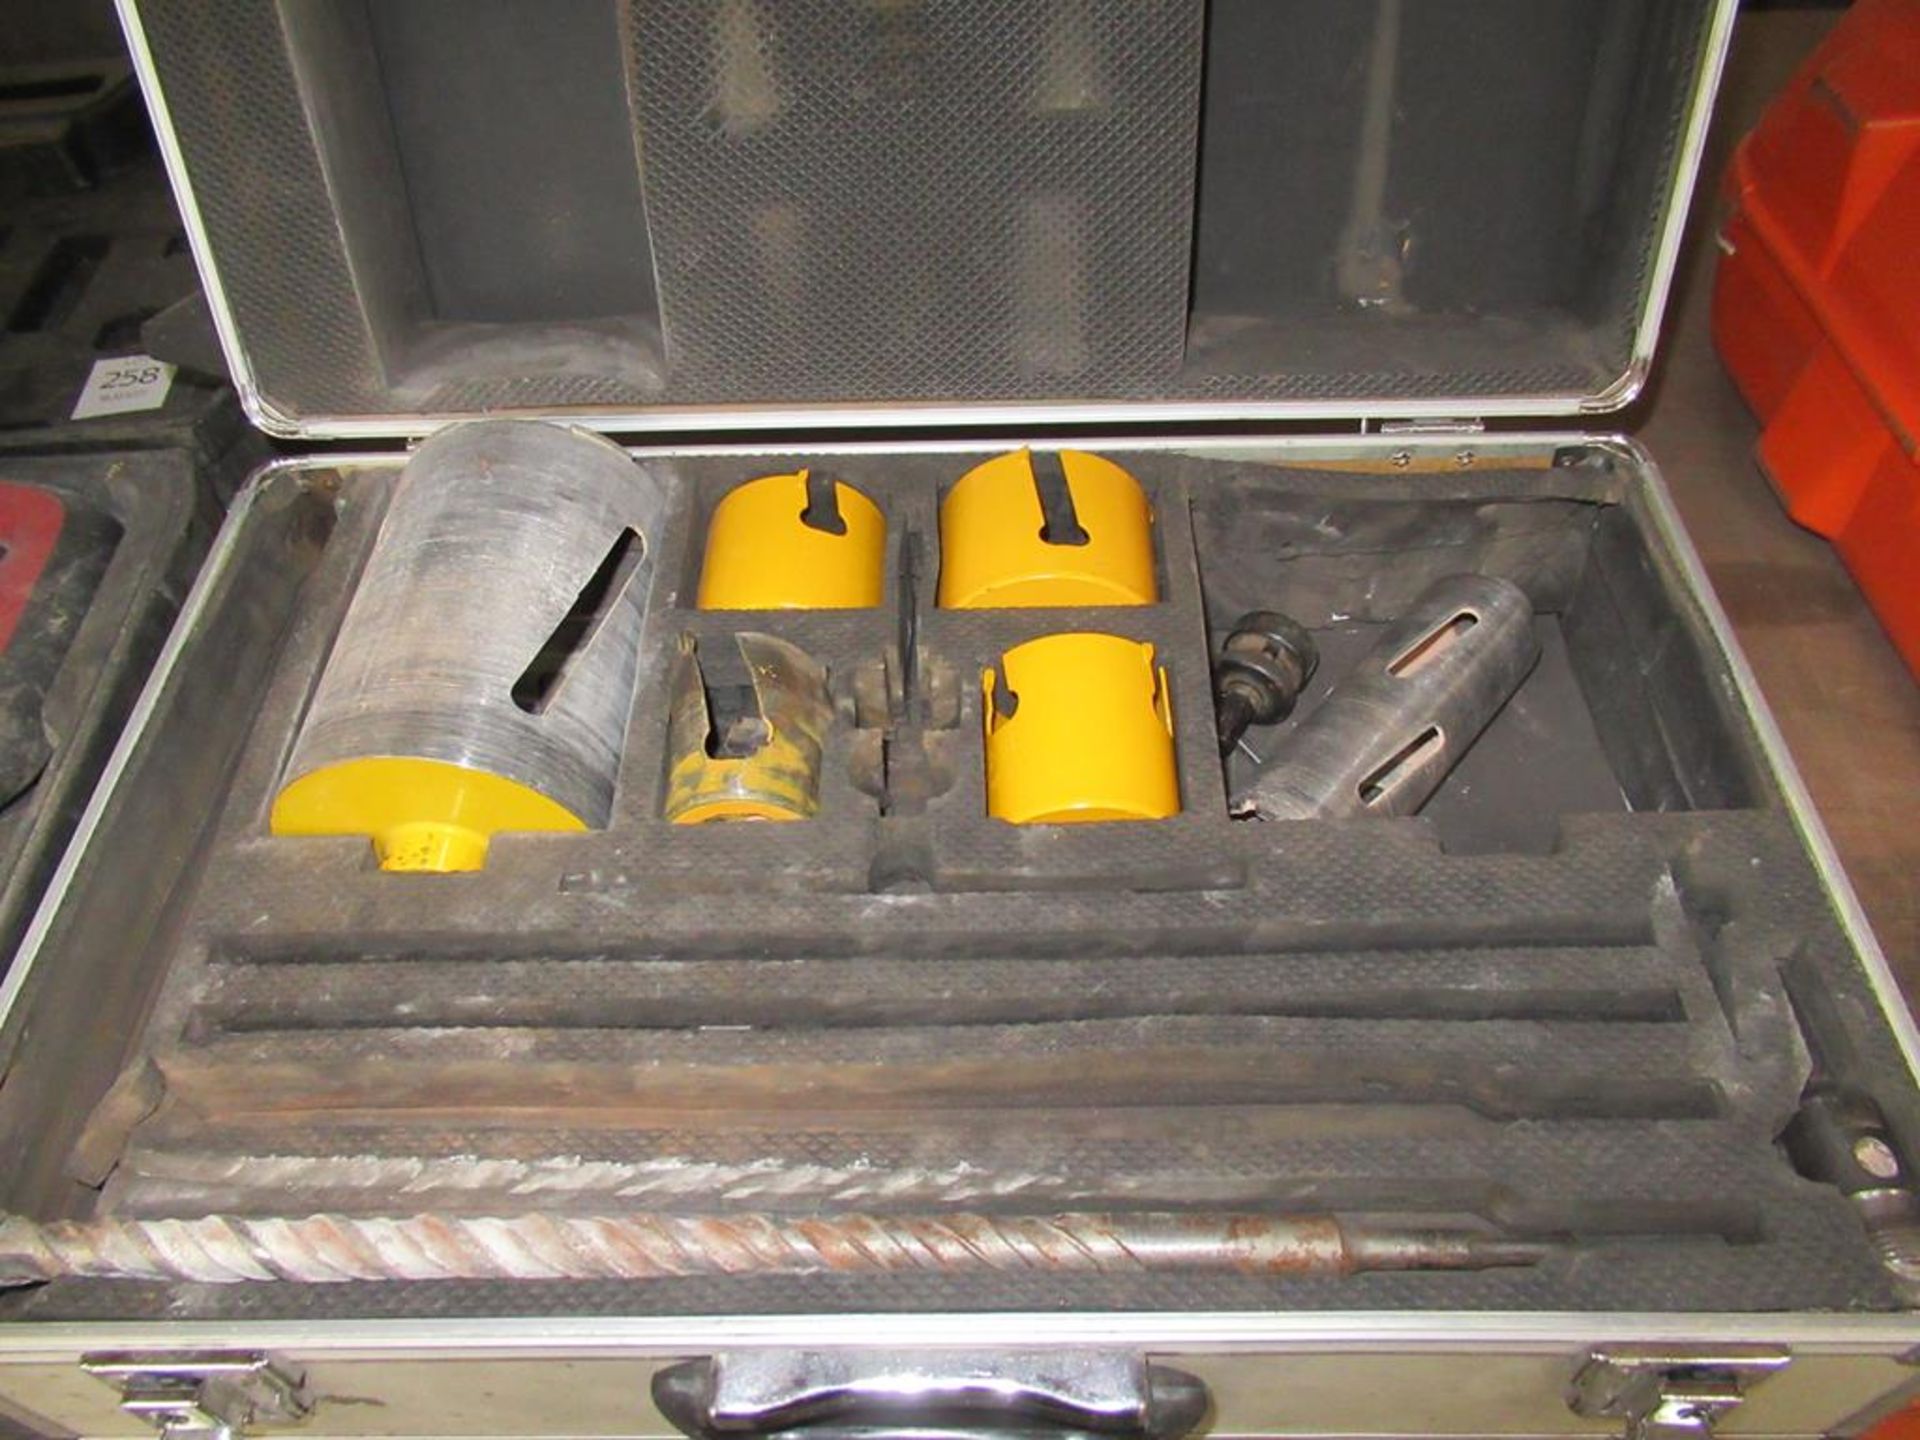 Case of cutters and drill bits